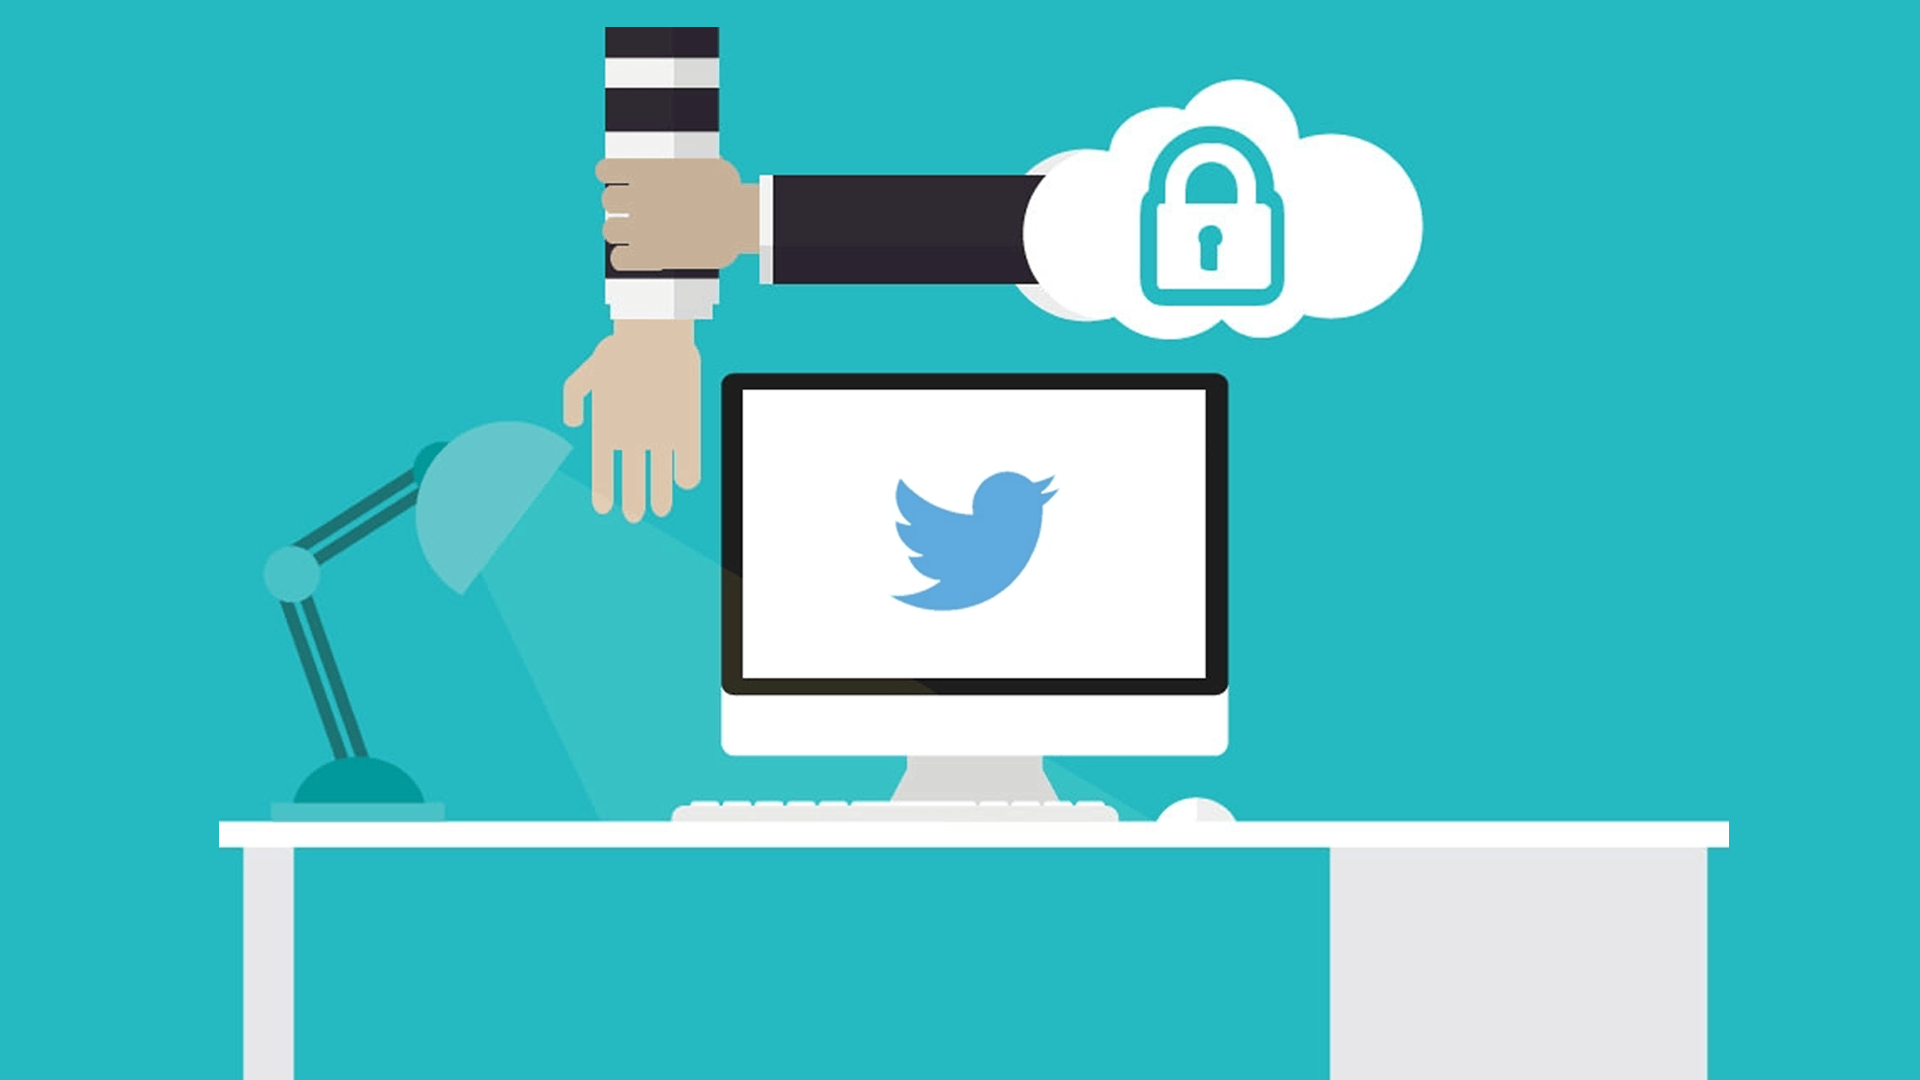 How to Protect Your Social Accounts?